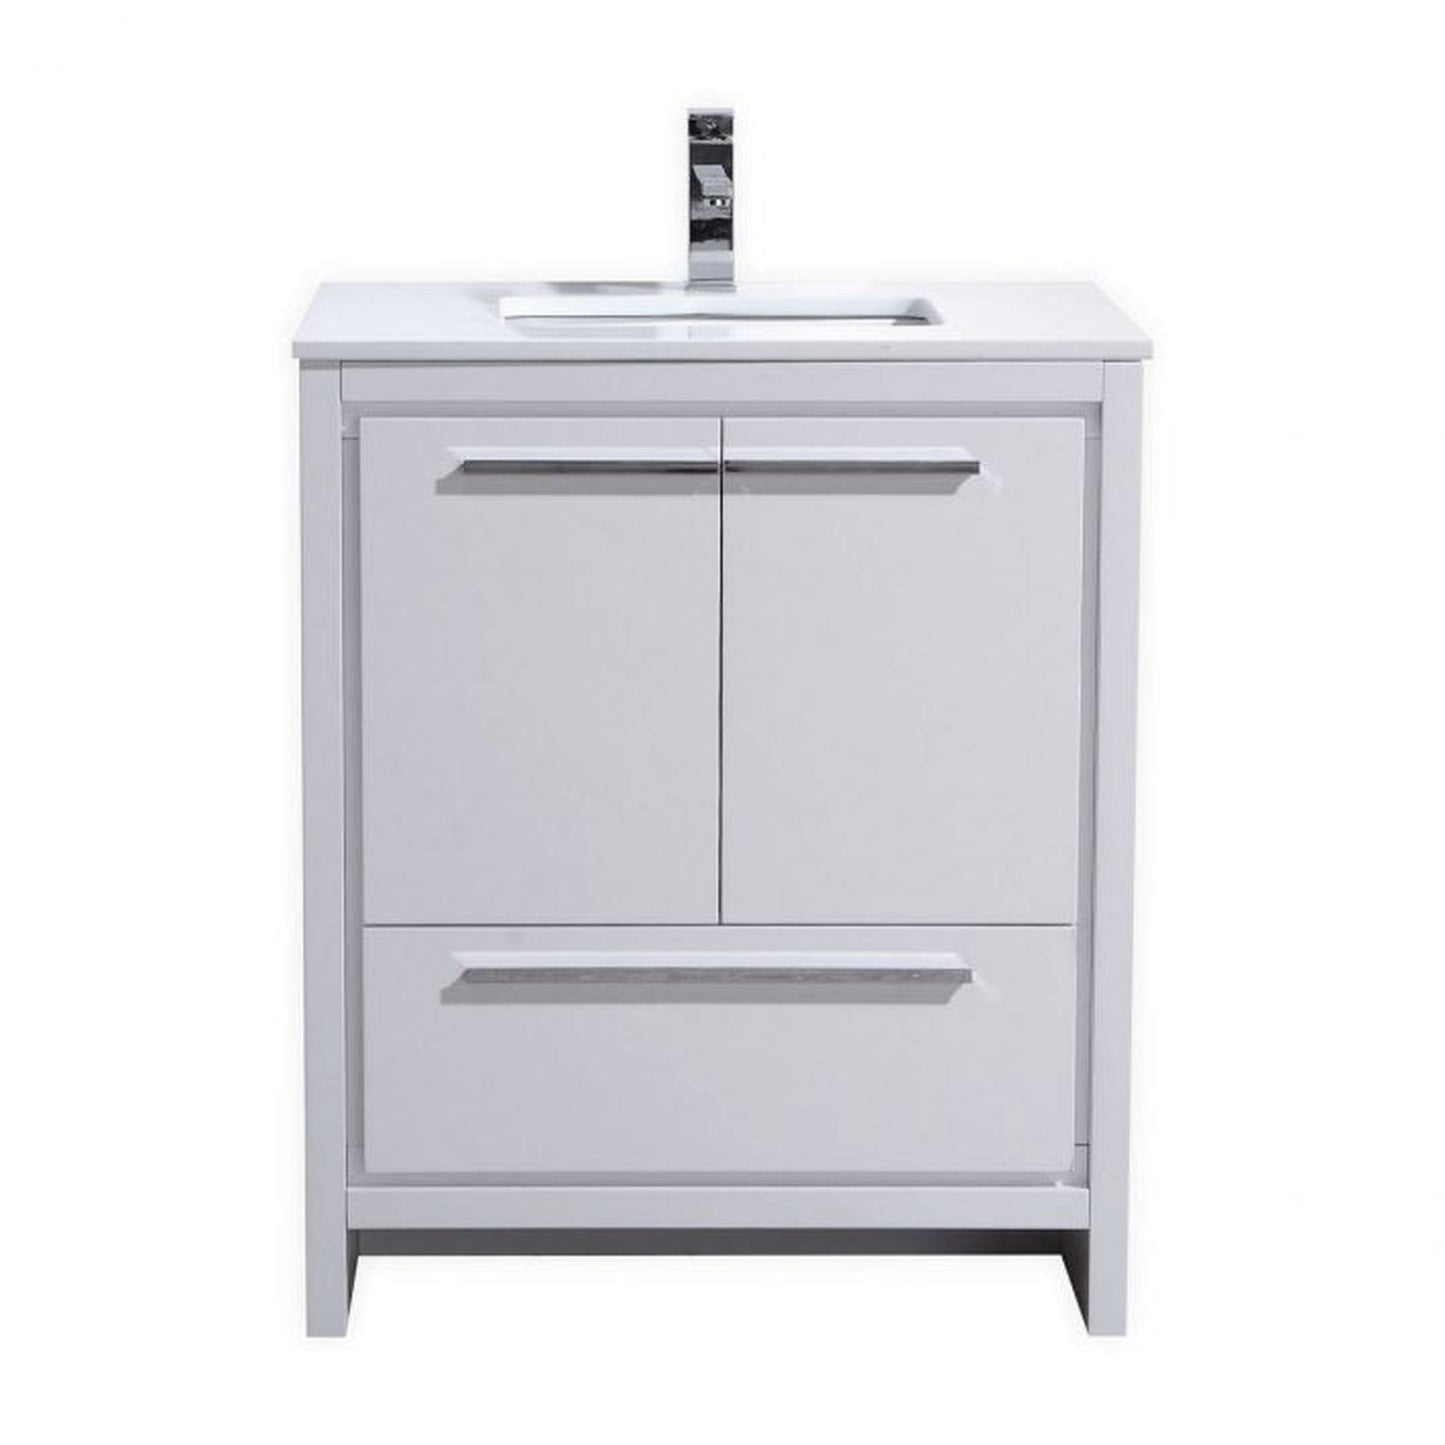 KubeBath Dolce 30" High Gloss White Freestanding Modern Bathroom Vanity With Quartz Vanity Top & Ceramic Sink With Overflow and 30" White Framed Mirror With Shelf